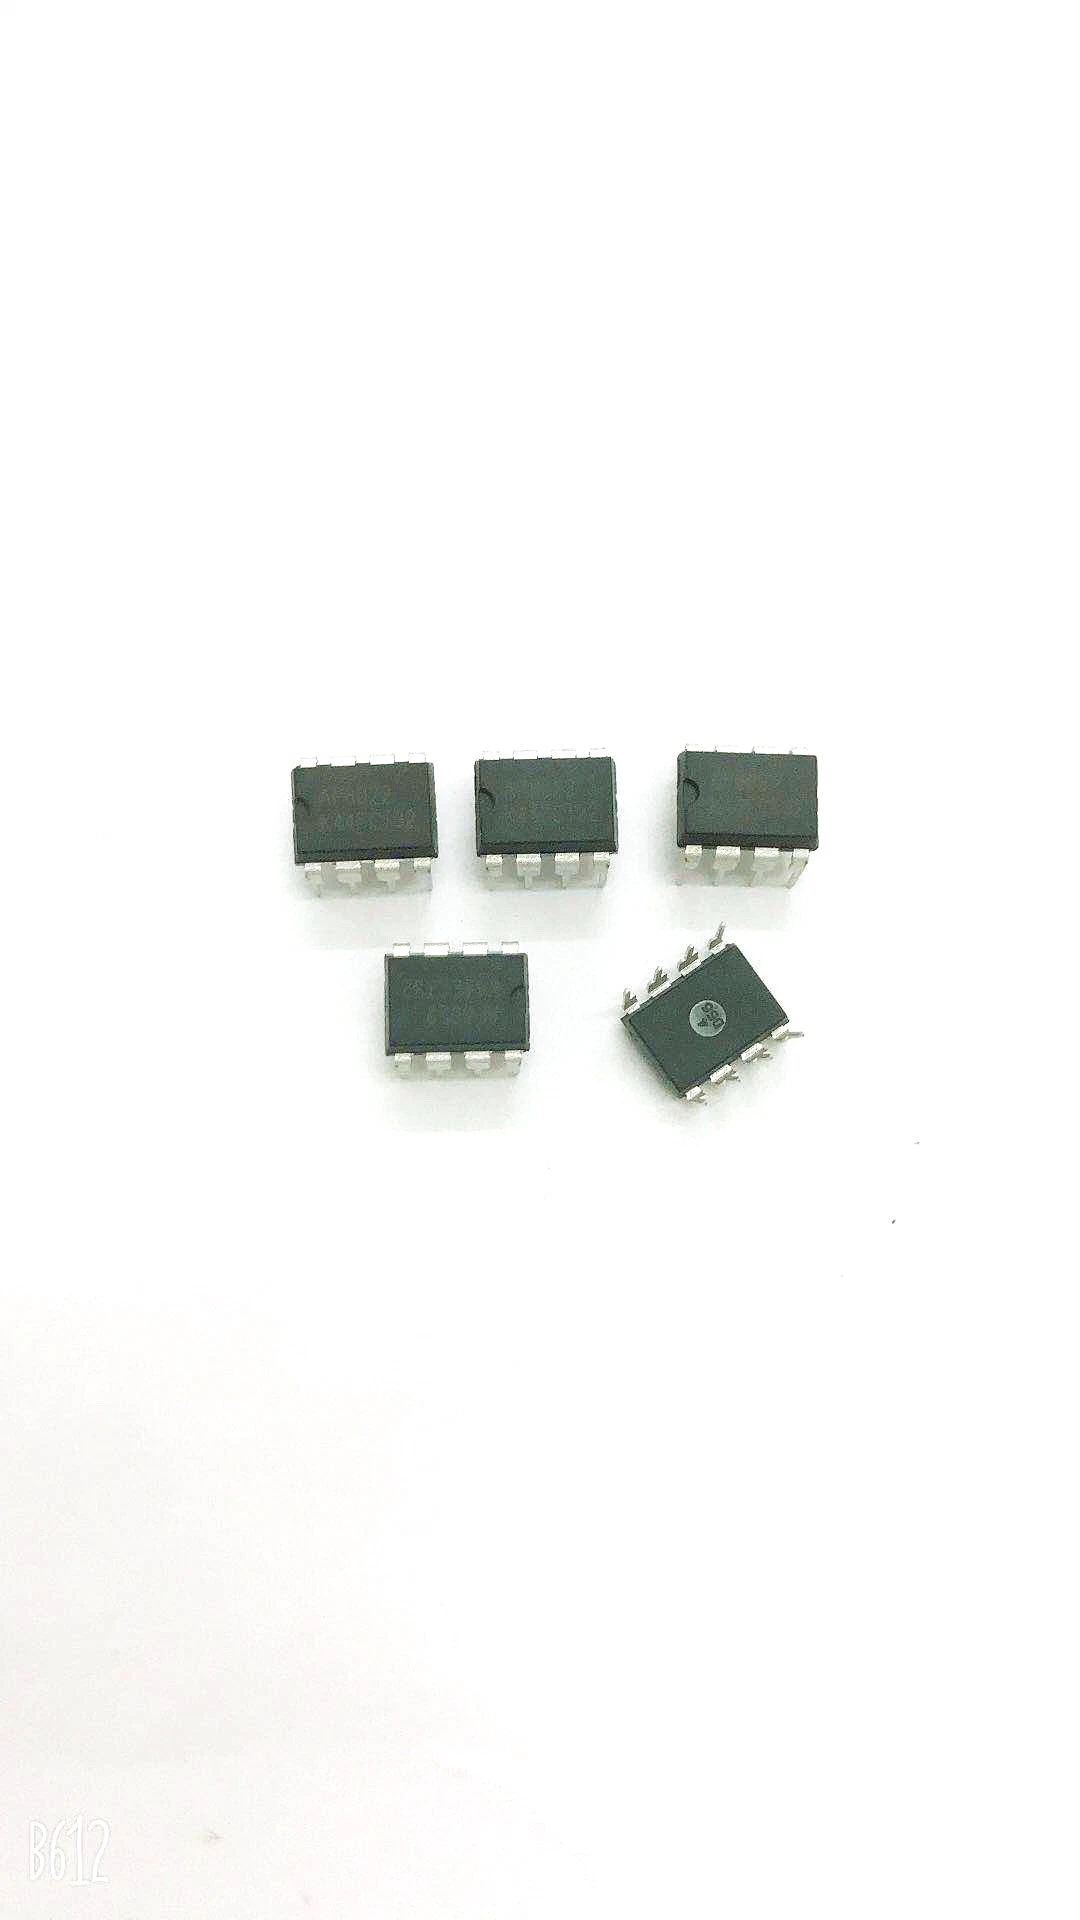 Non-isolated LED lighting Driver IC SDH790XDH Electronic Component CTC